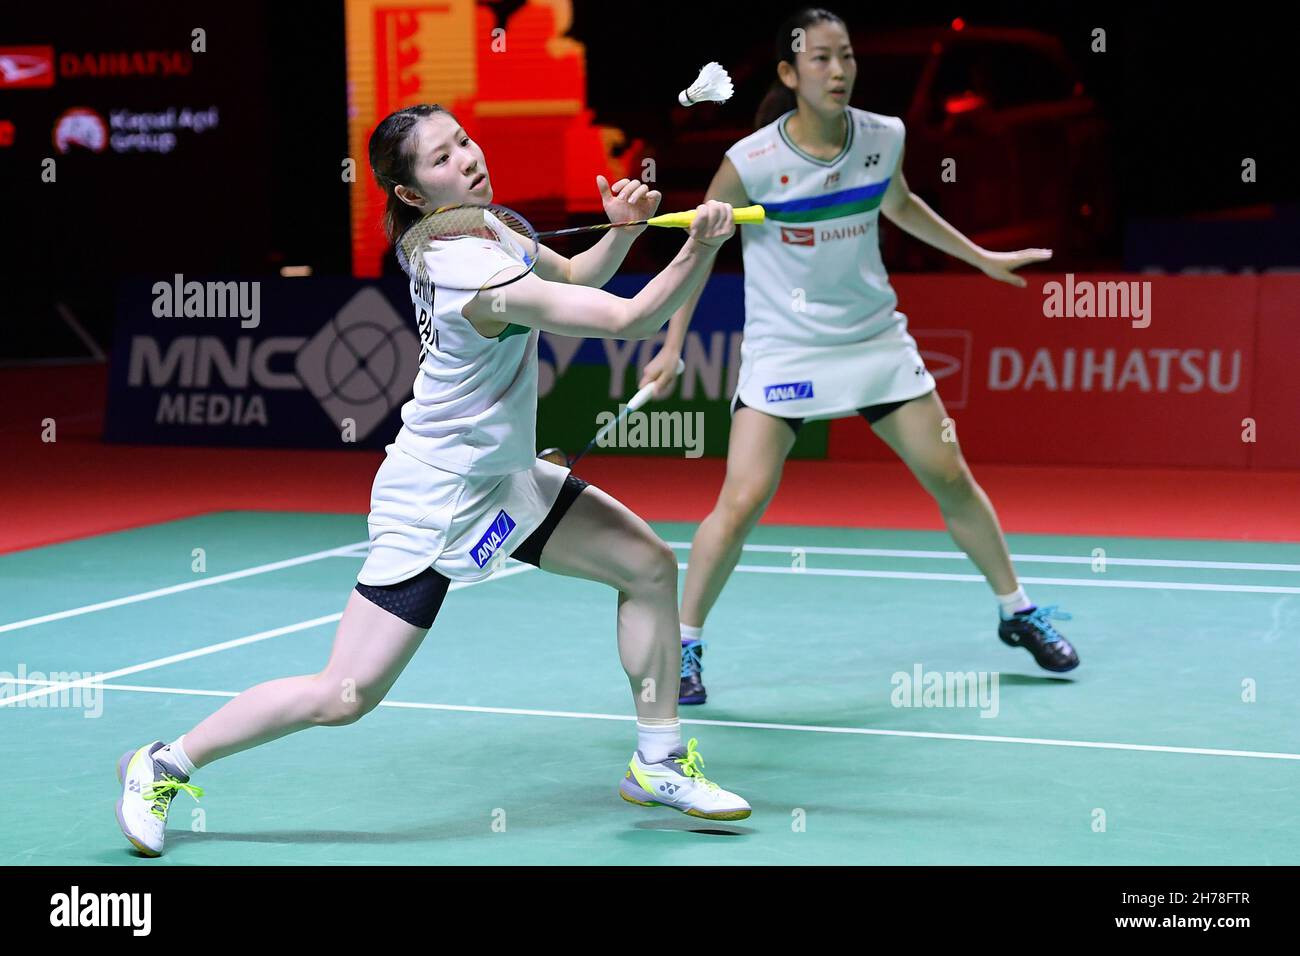 Bali. 21st Nov, 2021. Chiharu Shida (L) and Nami Matsuyama of Japan compete  during the women's doubles final against Jeung Na Eun and Kim Hye Jeong of  South Korea at Indonesia Masters